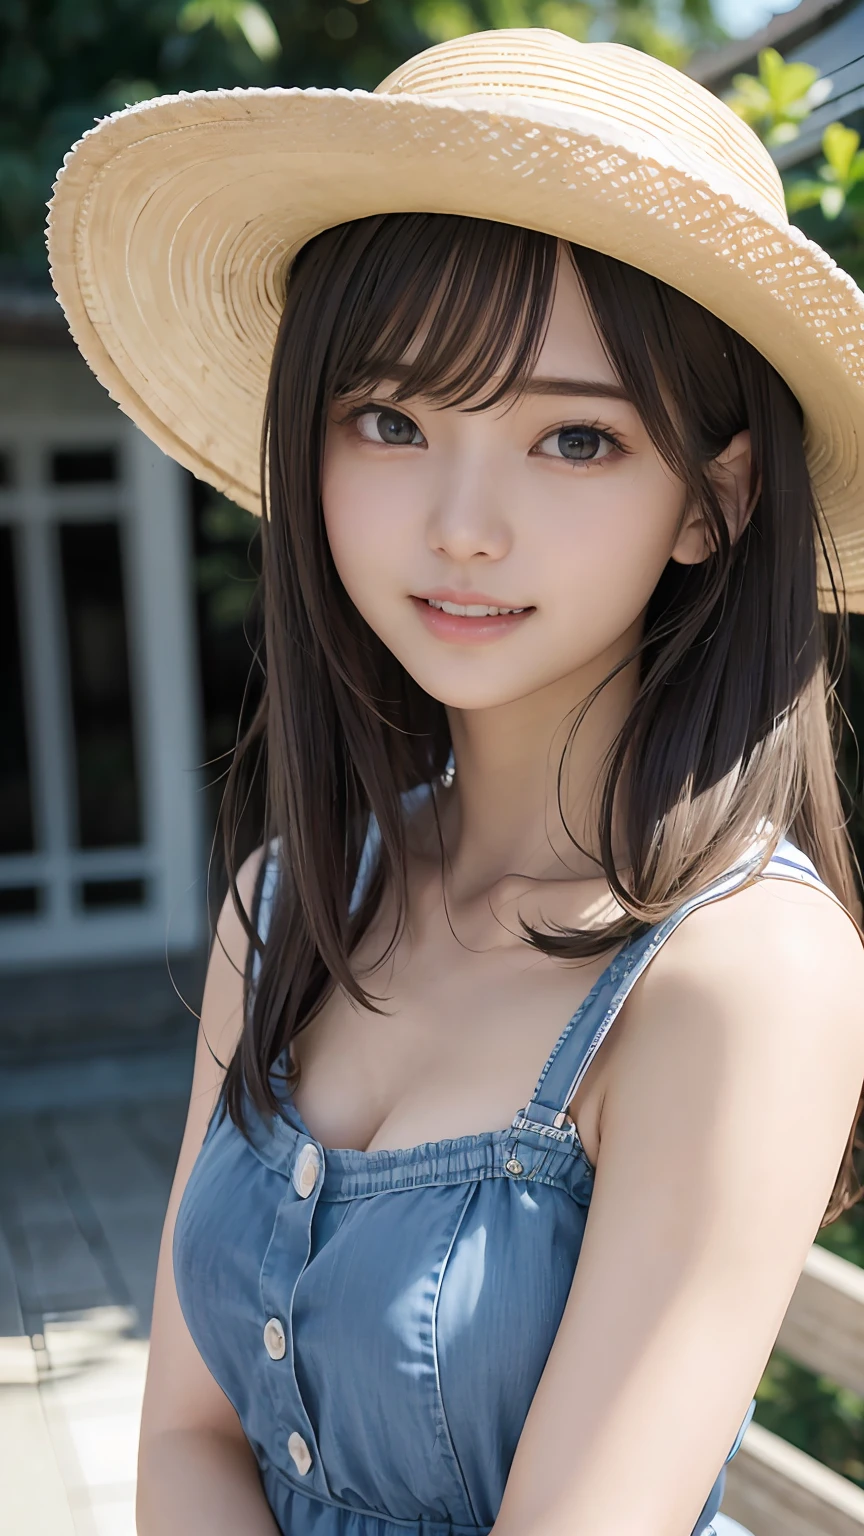 Multi-angle、top-quality、(((cowboy  shot)))、((Facing straight ahead))、Bust Focus、Soft light、(depth of fields)、超A high resolution、(Photorealsitic:1.4)、Raw photography、ambient occlusion、a straw fedora hat、((17 age))、((a small face))、ren、1girl in, Swollen eyes、(Dark blonde hair：1)solo, (A smile:1.2), (dark brown eyes,catchlight), Fine skin, Tube top、(excellent、​masterpiece)、1girl in、beautidful eyes、Harmonious facial features、​masterpiece, The highest image quality, hightquality, beautiful a girl, japanes, Japan , detaileds, A detailed eye, Detailed skin, Beautiful skins, 超A high resolution, (Realistic:1.4)、Beautiful skins, (Dark blonde hair:1)、Longhaire、Pattsun bangs、 (A hyper-realistic), (illustratio), (hight resolution), (8K), (ighly detailed), (The best illustrations), (beautifully detailed eyes), (Ultra-detail), (wall-paper), (Detailed face), looking at the viewers, finely detail、A detailed face、pureerosfaceace_v1、A smile、((Opening Mouth：1.2))、((Show your teeth and smile))、Looking straight ahead、Looking straight ahead、angle from waist up、photos realistic、Bright lighting、profetional lighting、17 age、